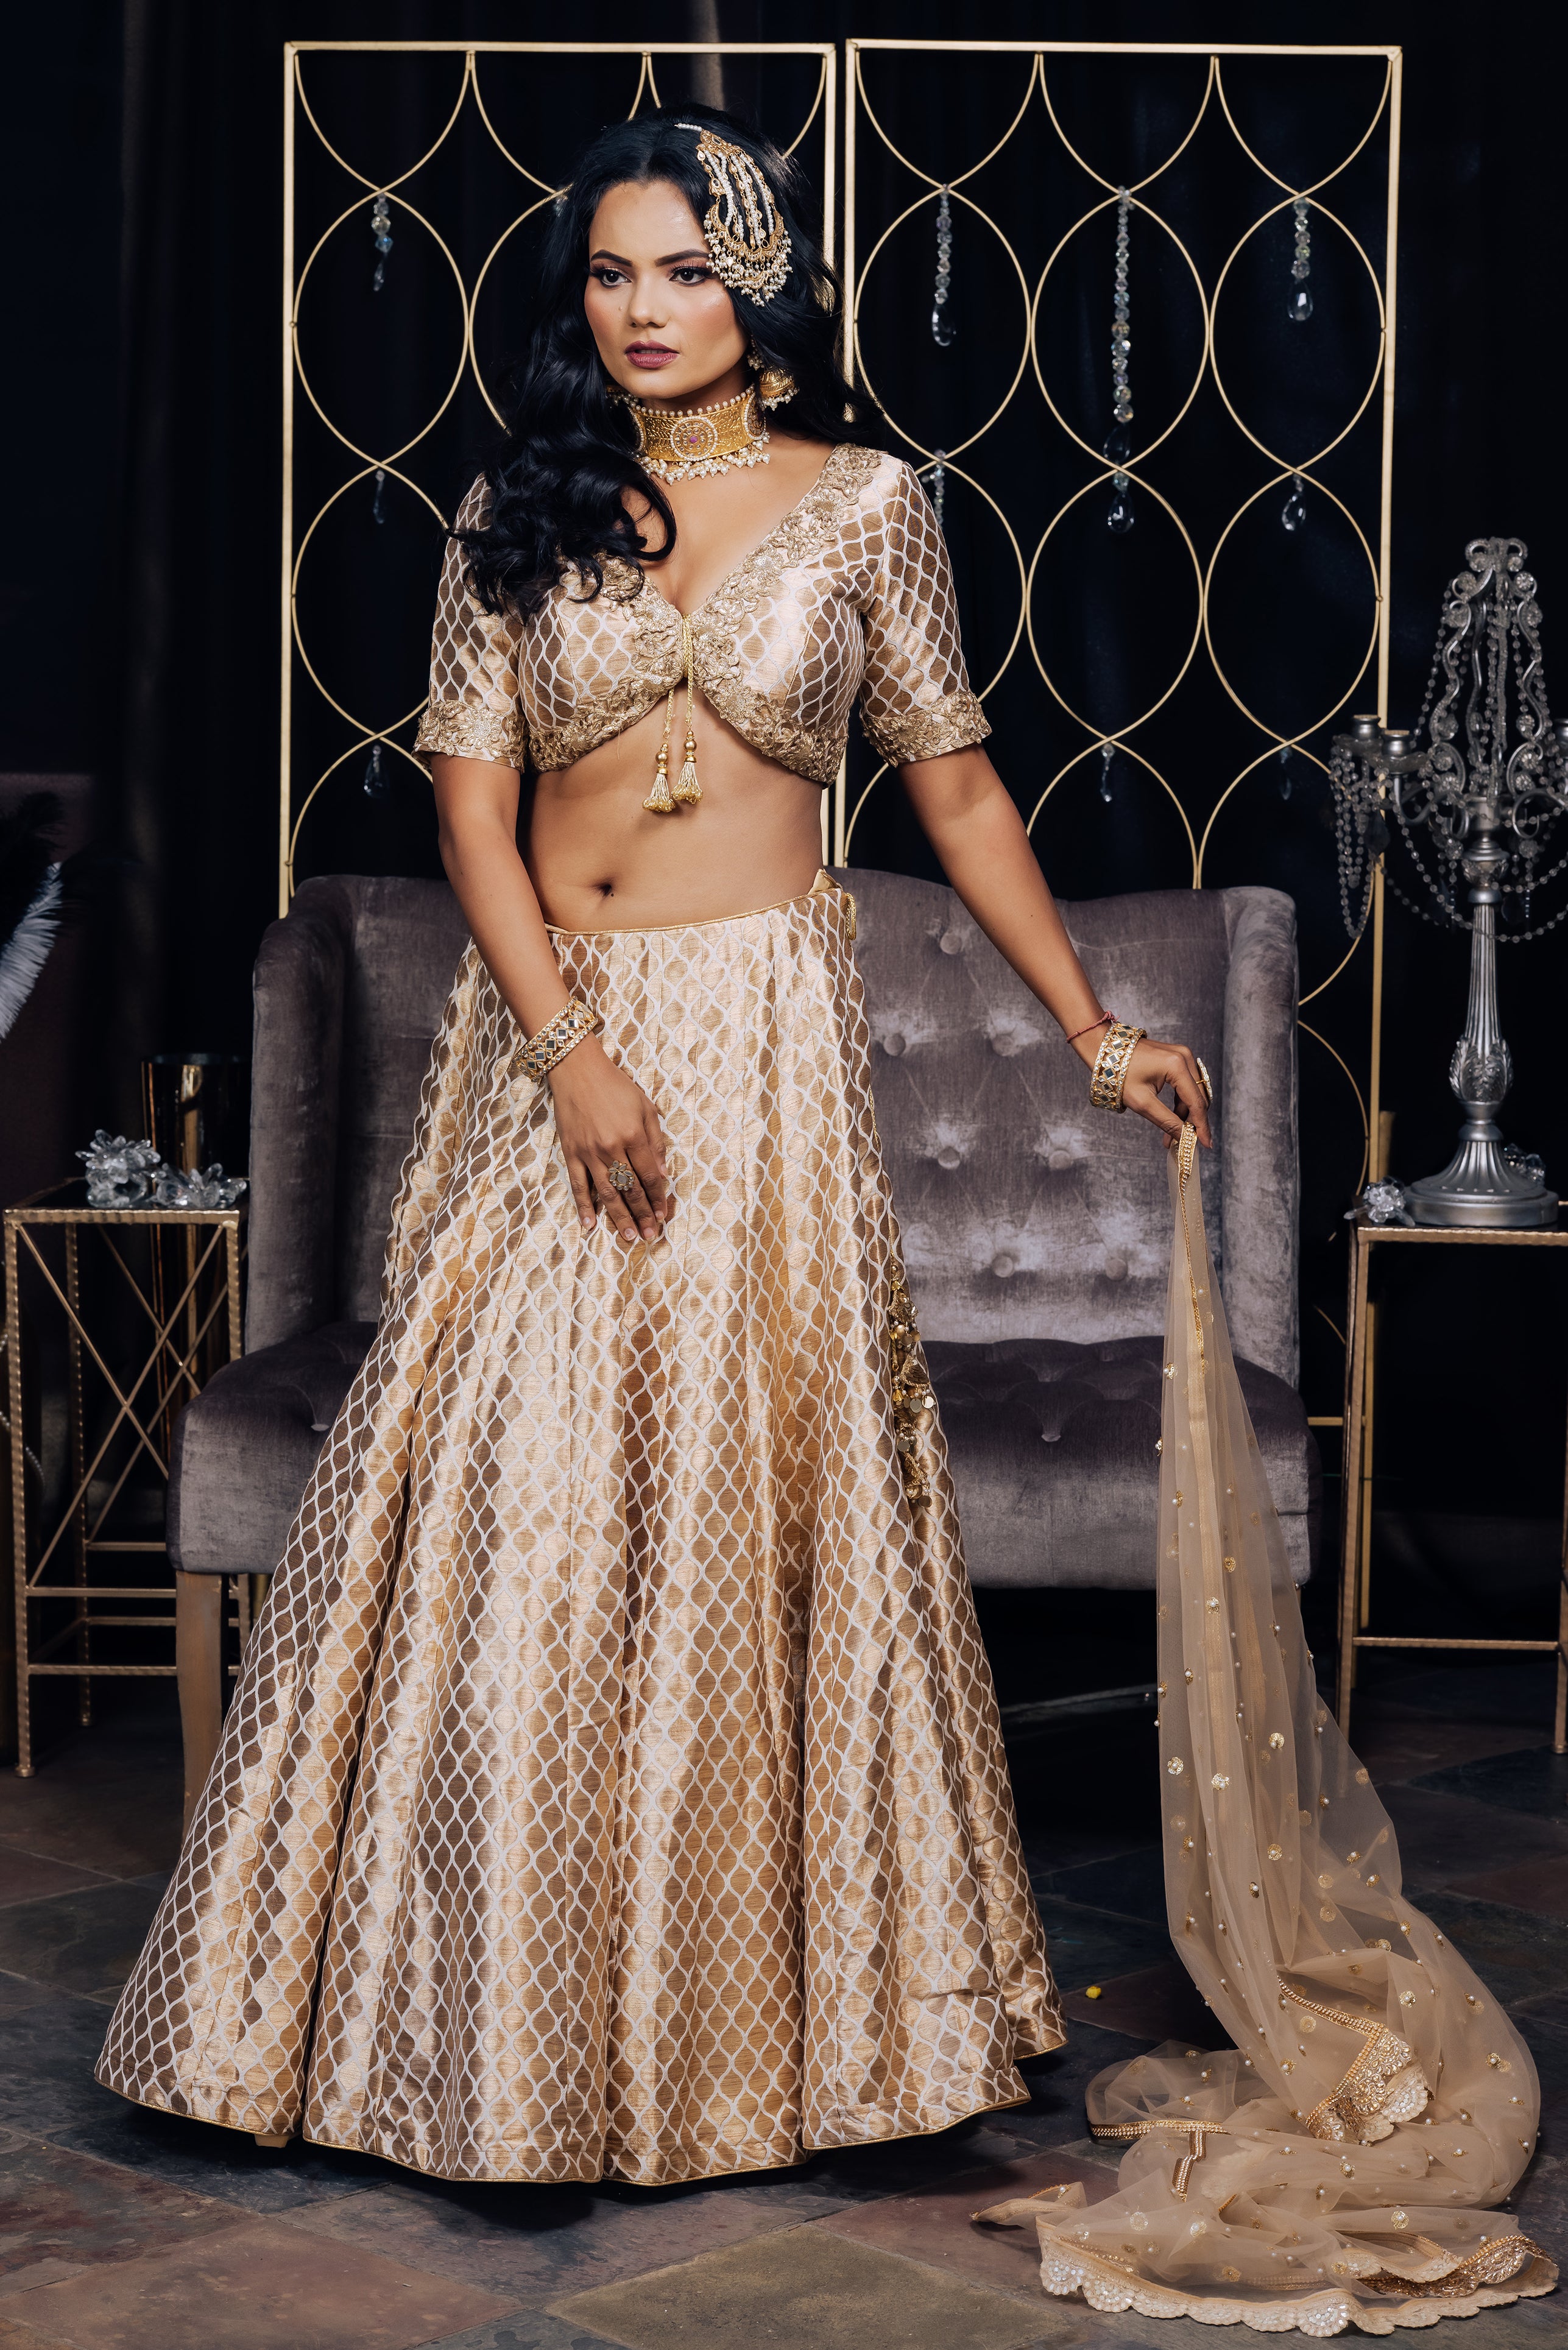 Aza - This light beige tiered lehenga by ace designer Manish Malhotra takes  the meaning of 'grand' to a whole new, glamorous level. An eloquent play of  fabrics, layers and tassels makes